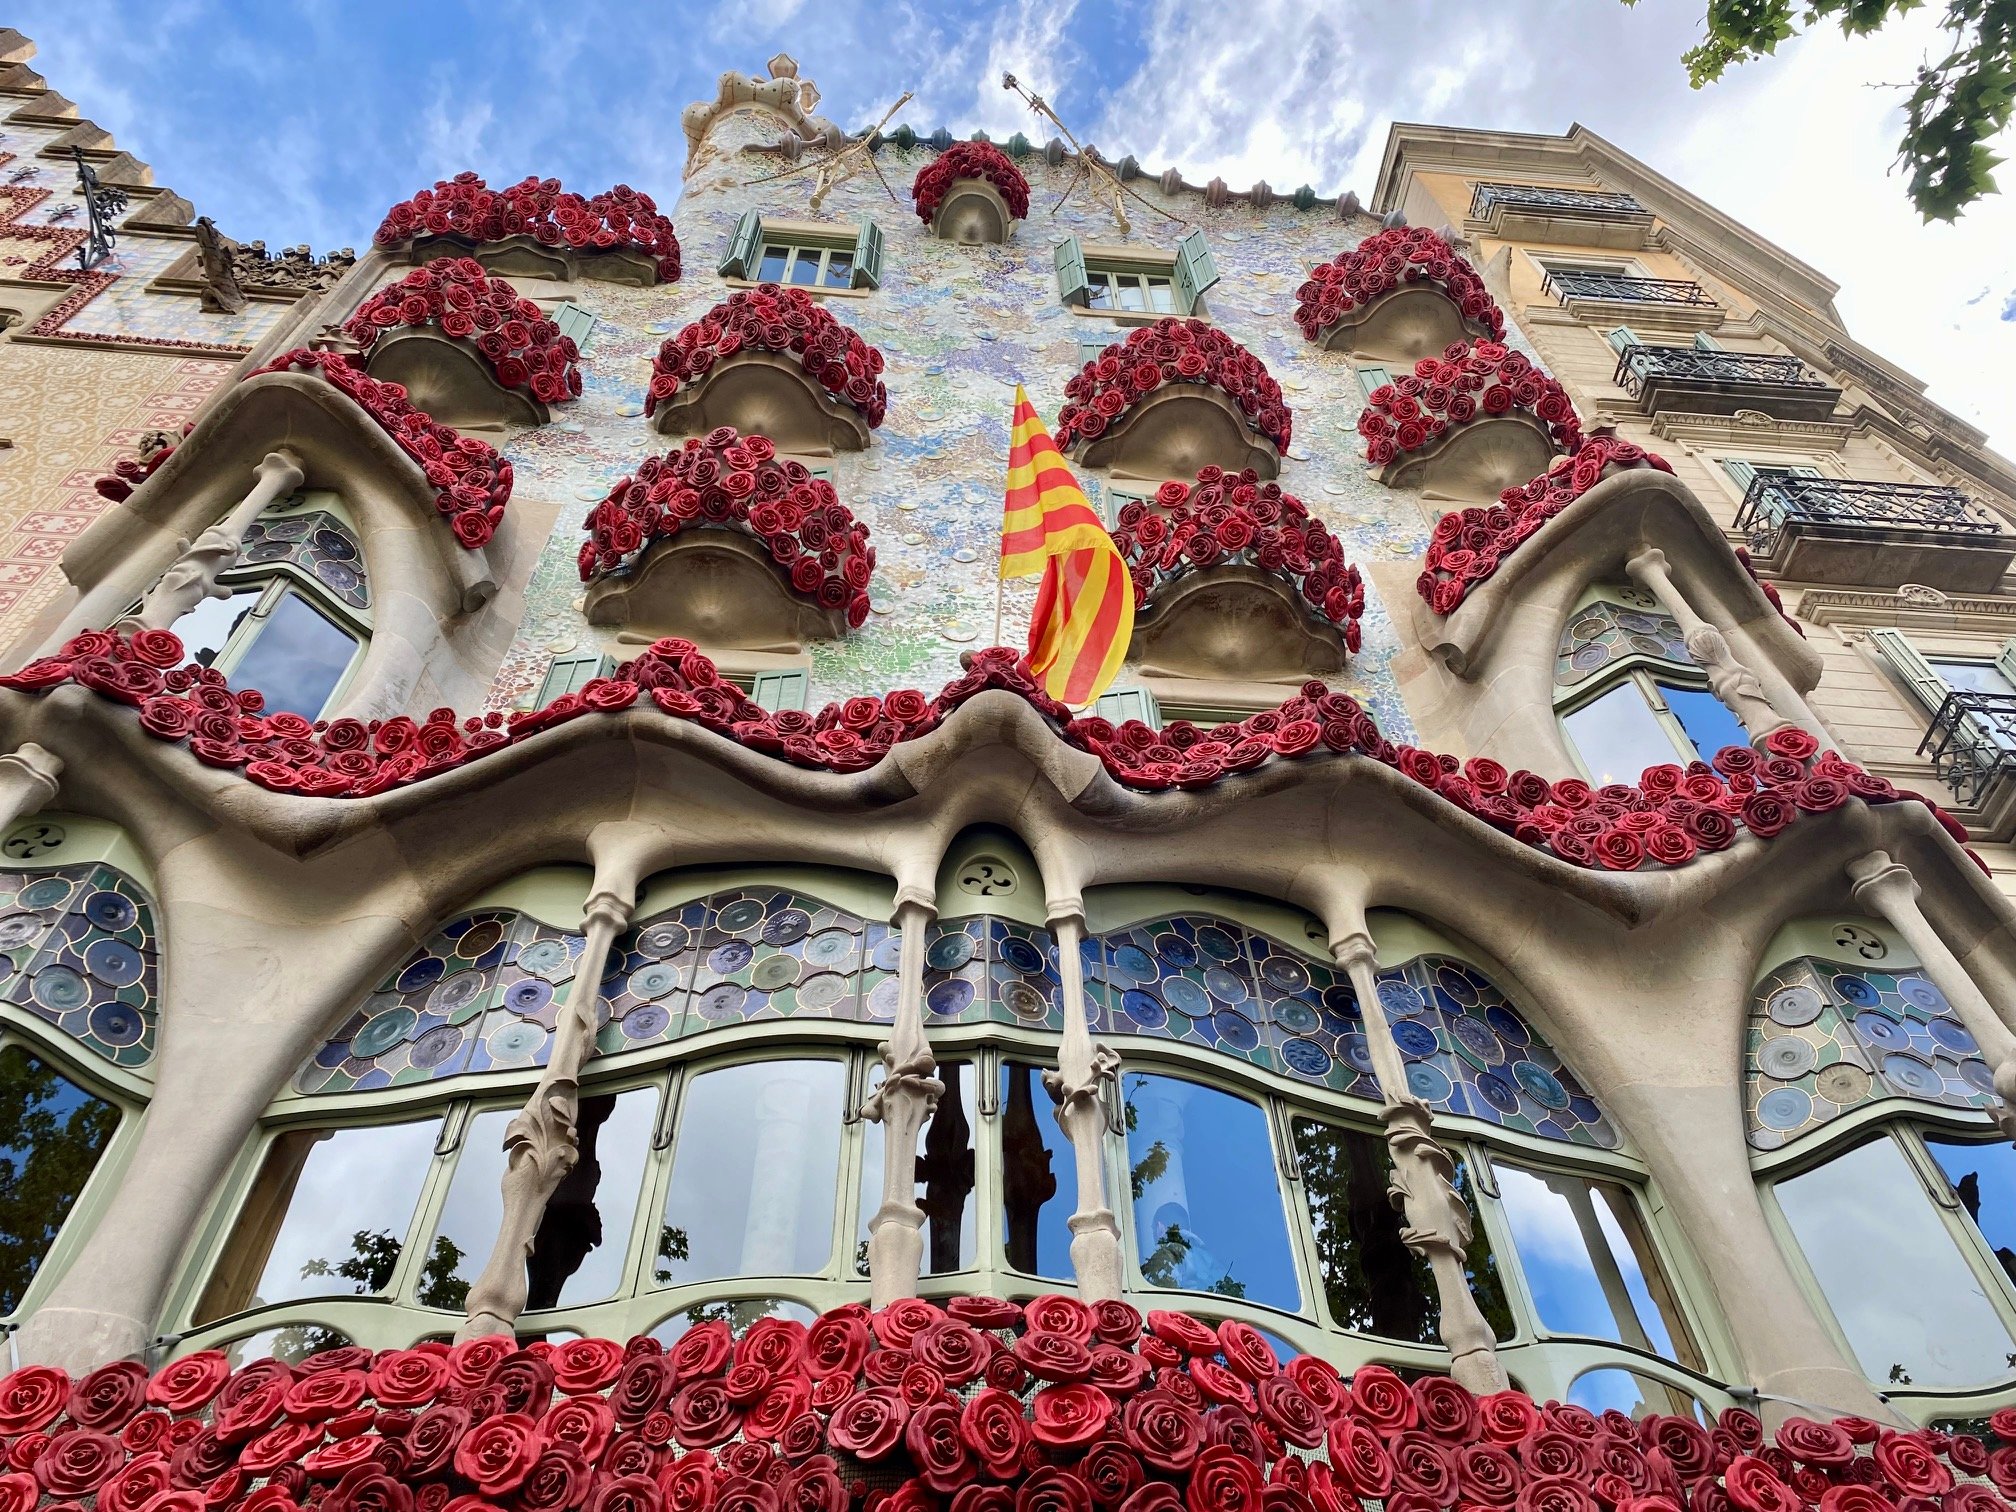 Casa Batllo being dressed up with roses